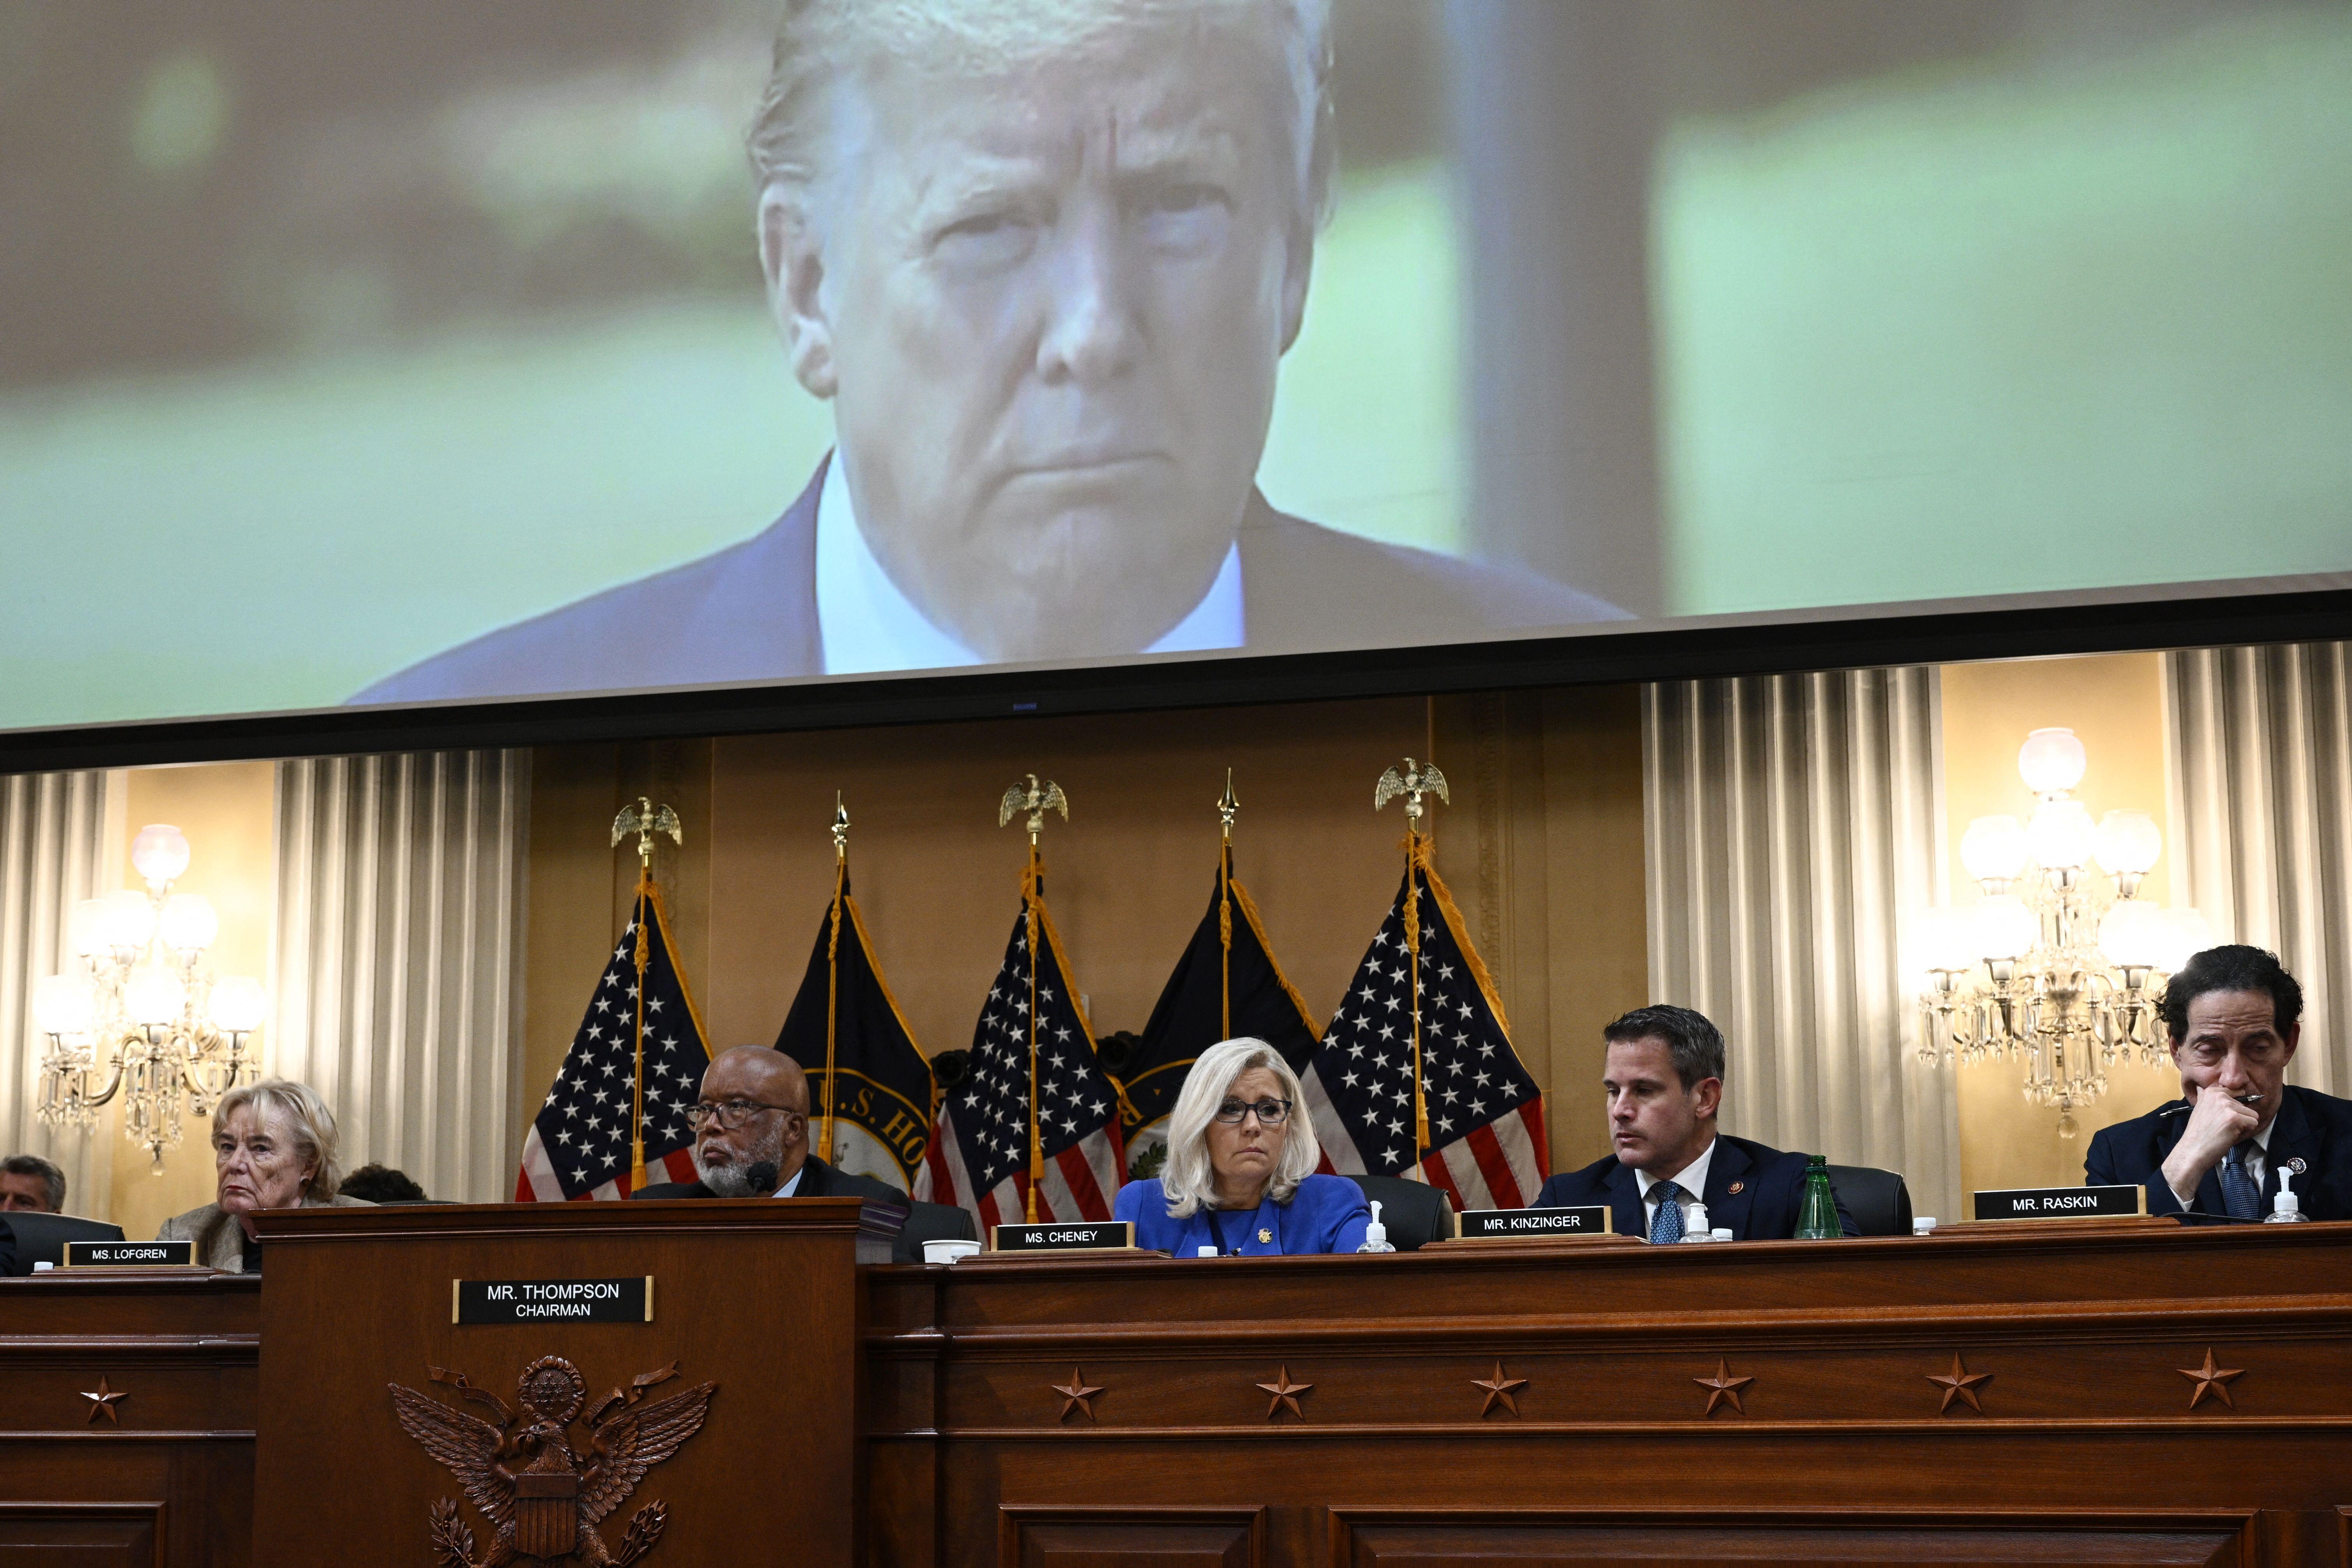 Former US President Donald Trump is seen on a screen during a House Select Committee hearing to Investigate the January 6th Attack on the US Capitol.